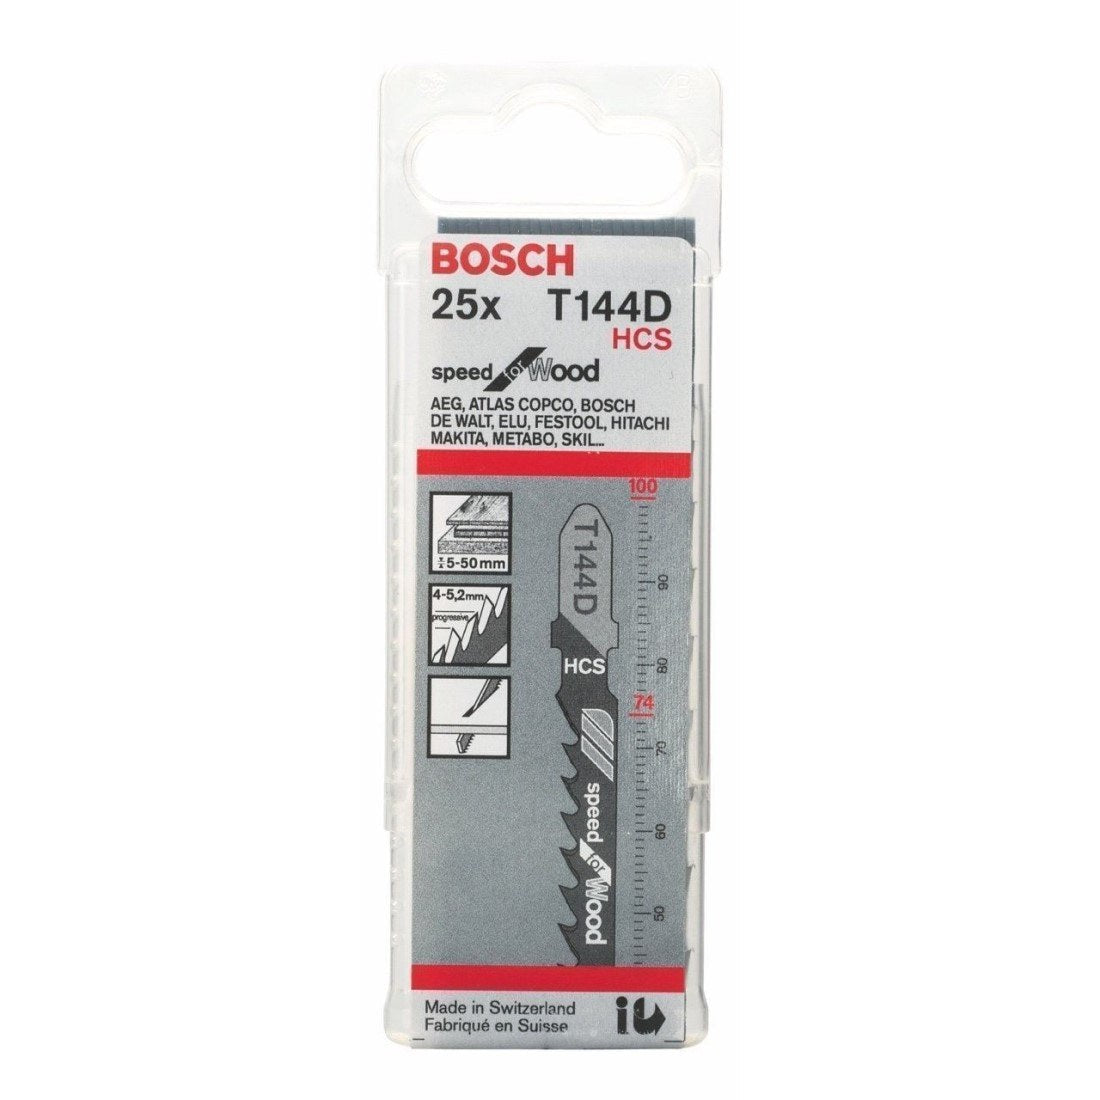 Bosch Jigsaw Blades T 144 D Speed for Wood 25 Pack 2608633625 Power Tool Services